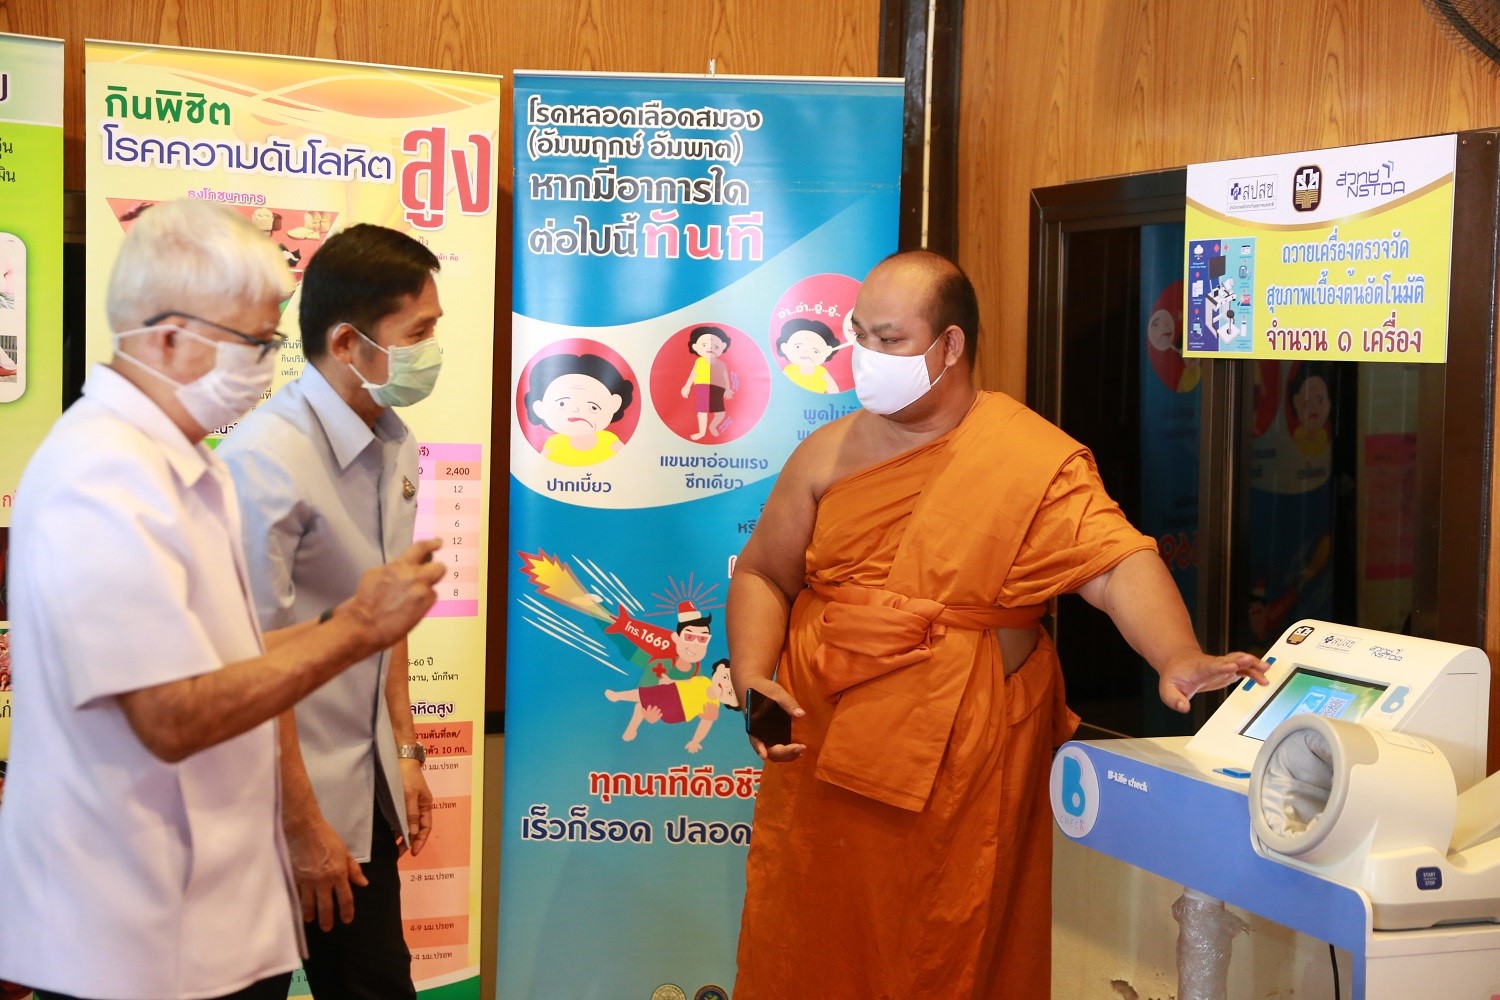 Empower Buddhist monks to bridge up the gap in Thai healthcare access